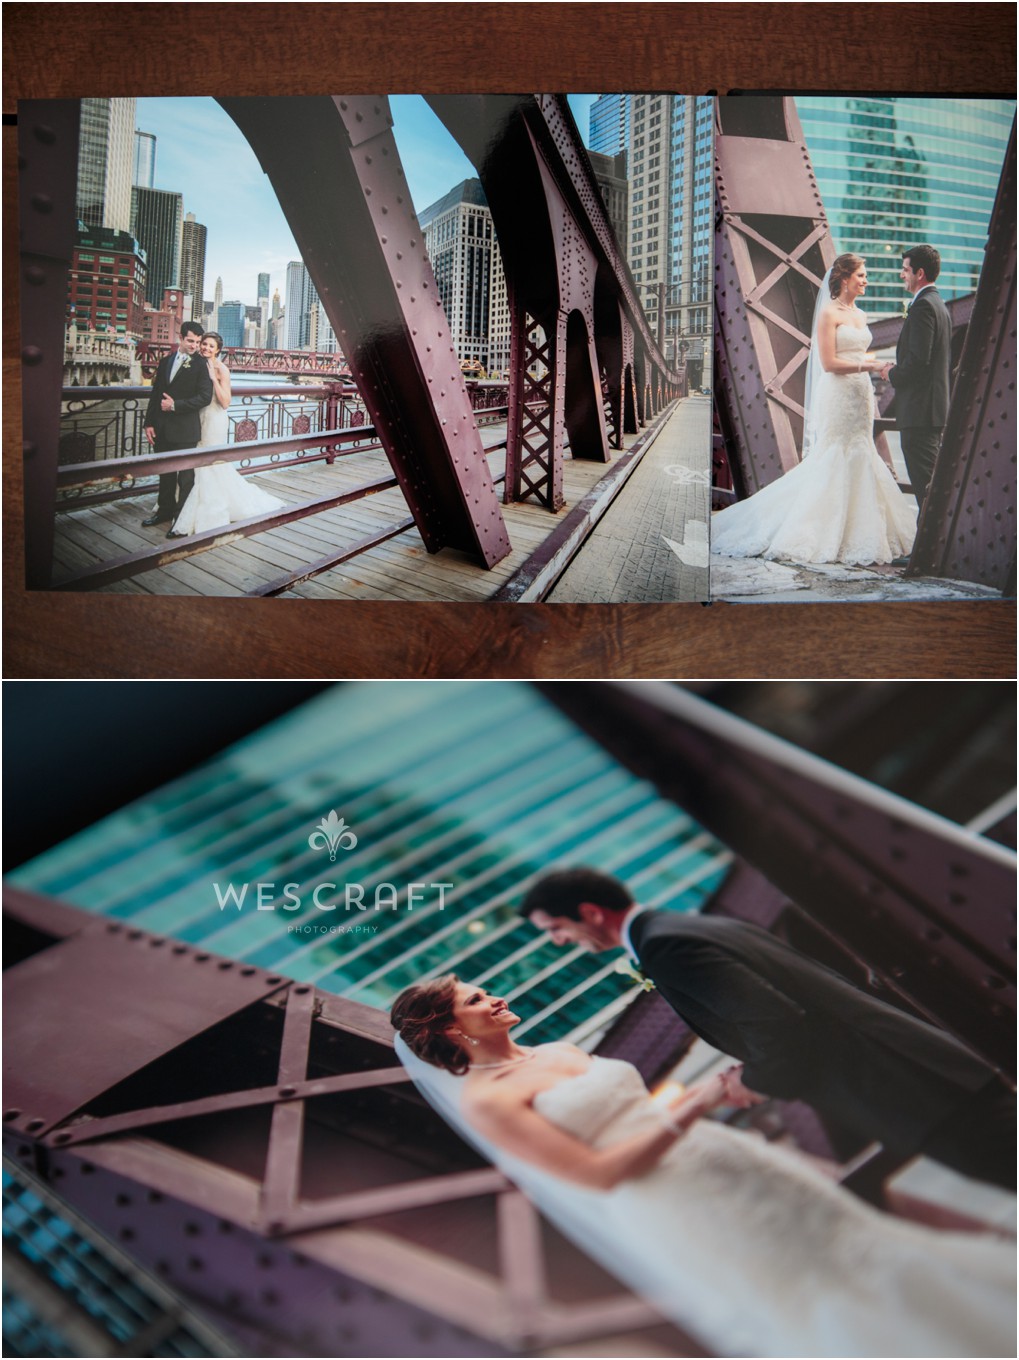 We strongly encourage having Wes Craft Photography design artwork for your home.  These photos look great in print don't they?  